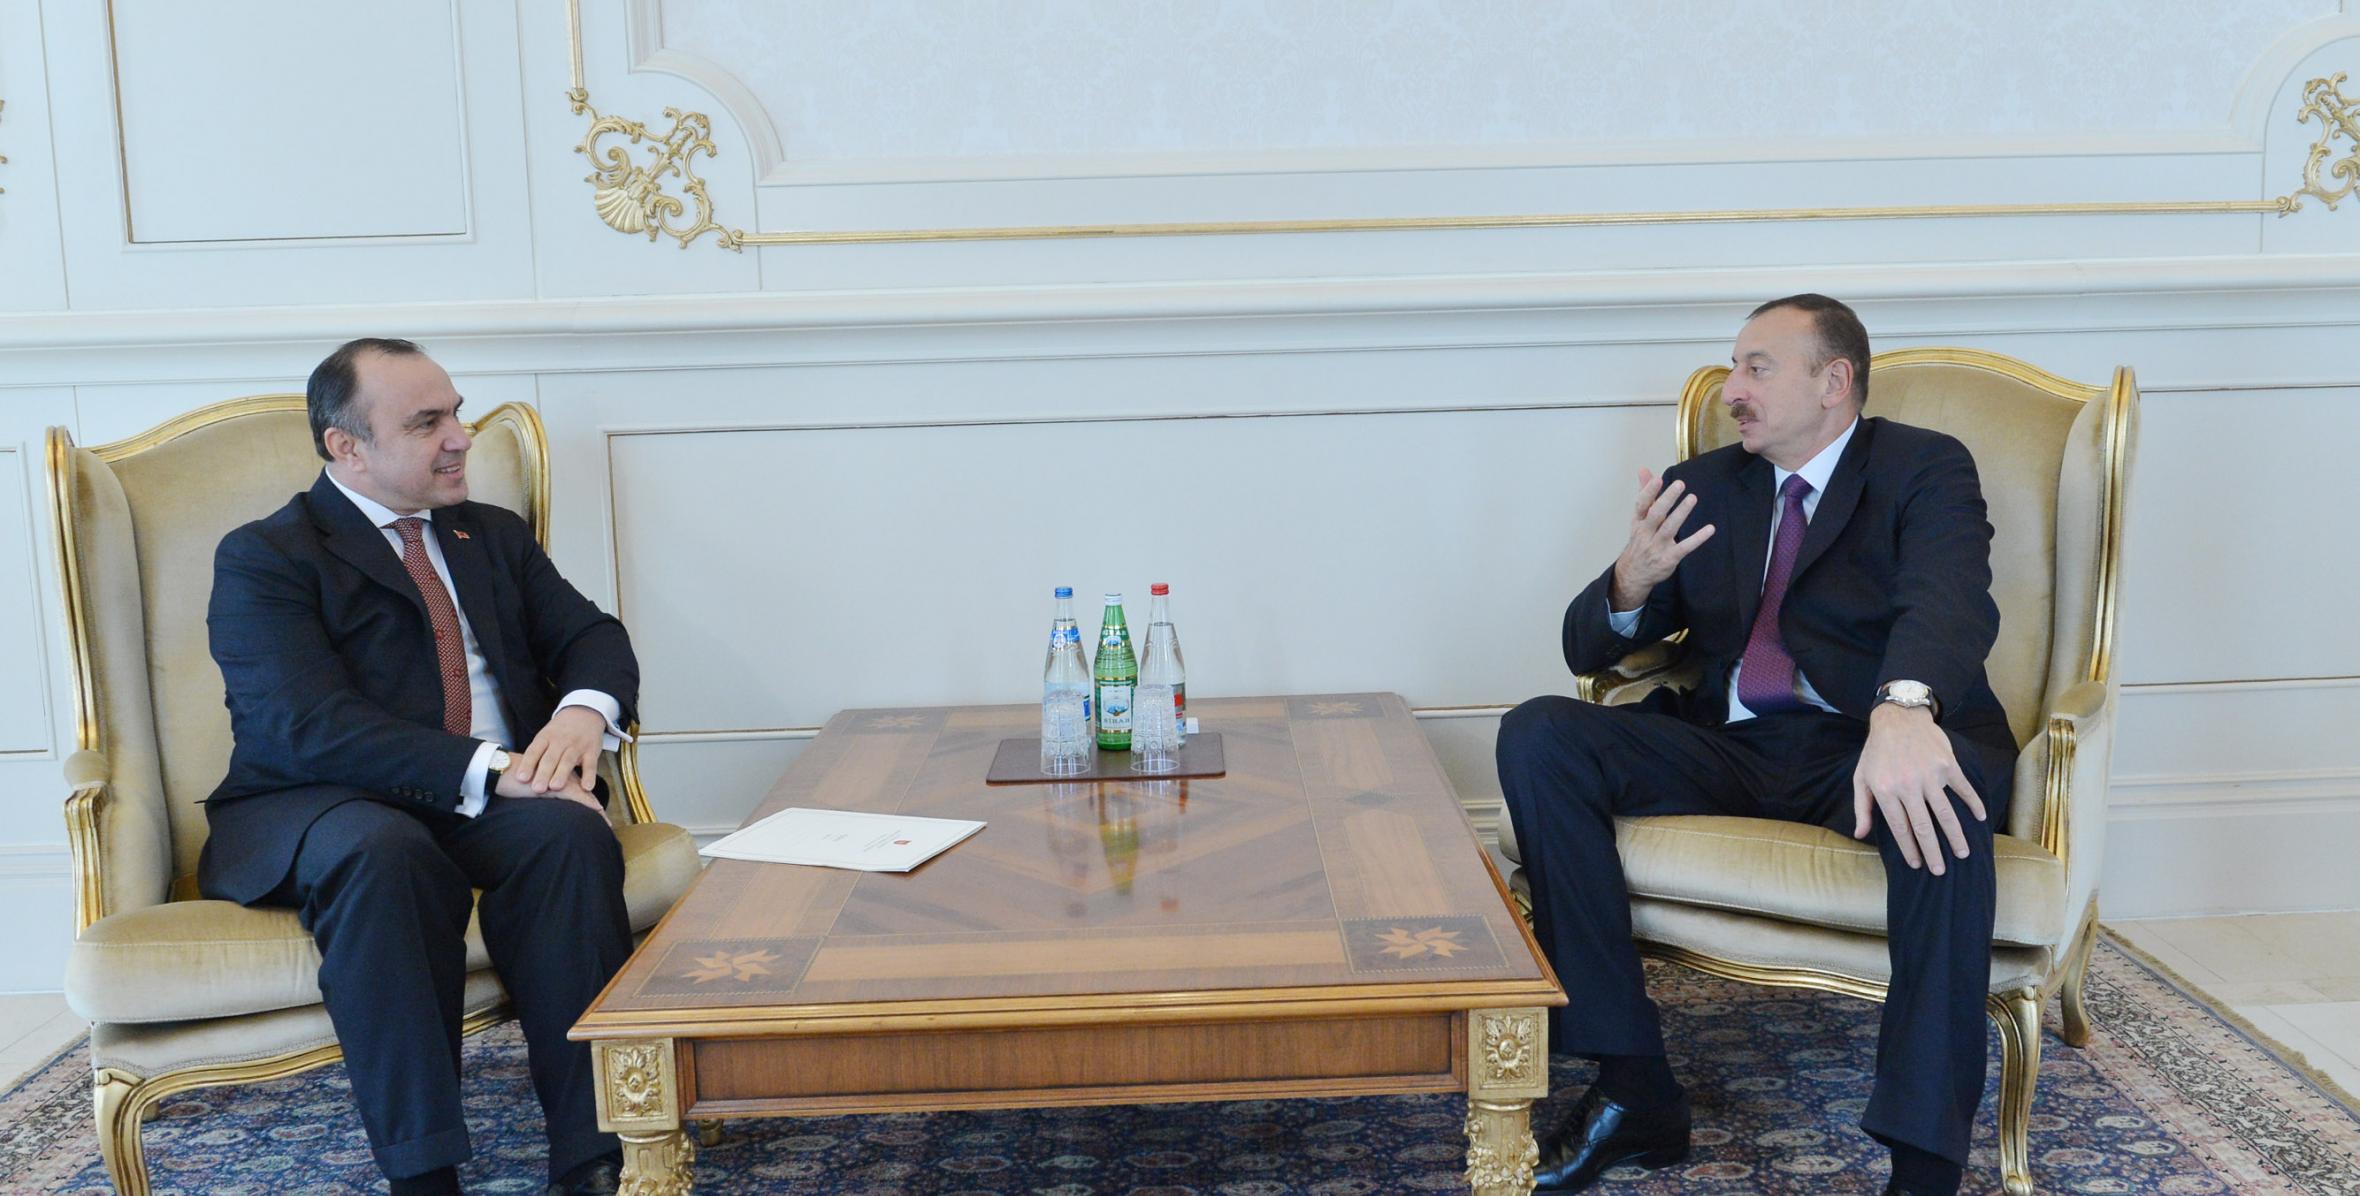 Ilham Aliyev has received the credentials of the newly-appointed Albanian ambassador to Azerbaijan